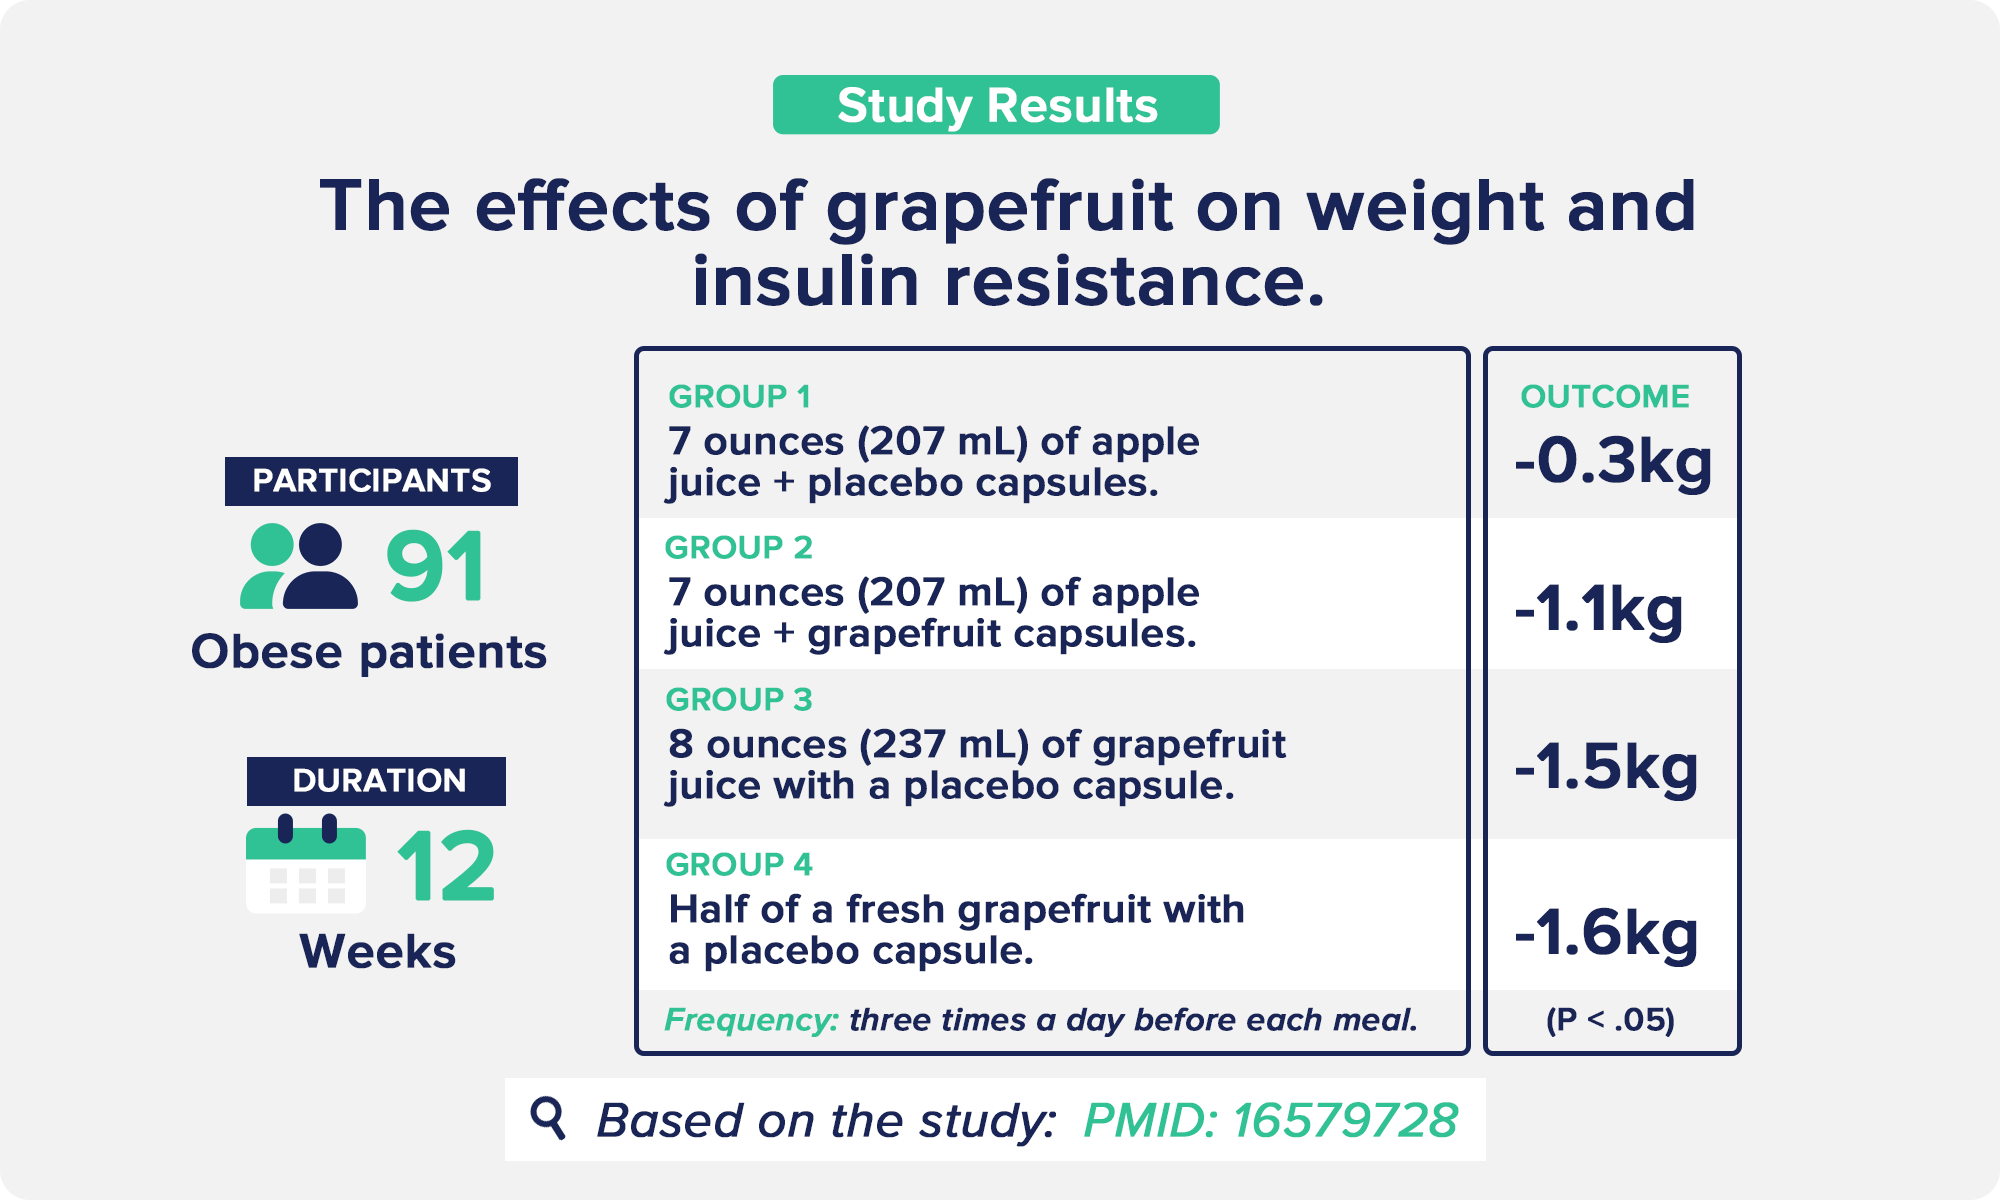 The effects of grapefruit on weight and insulin resistance